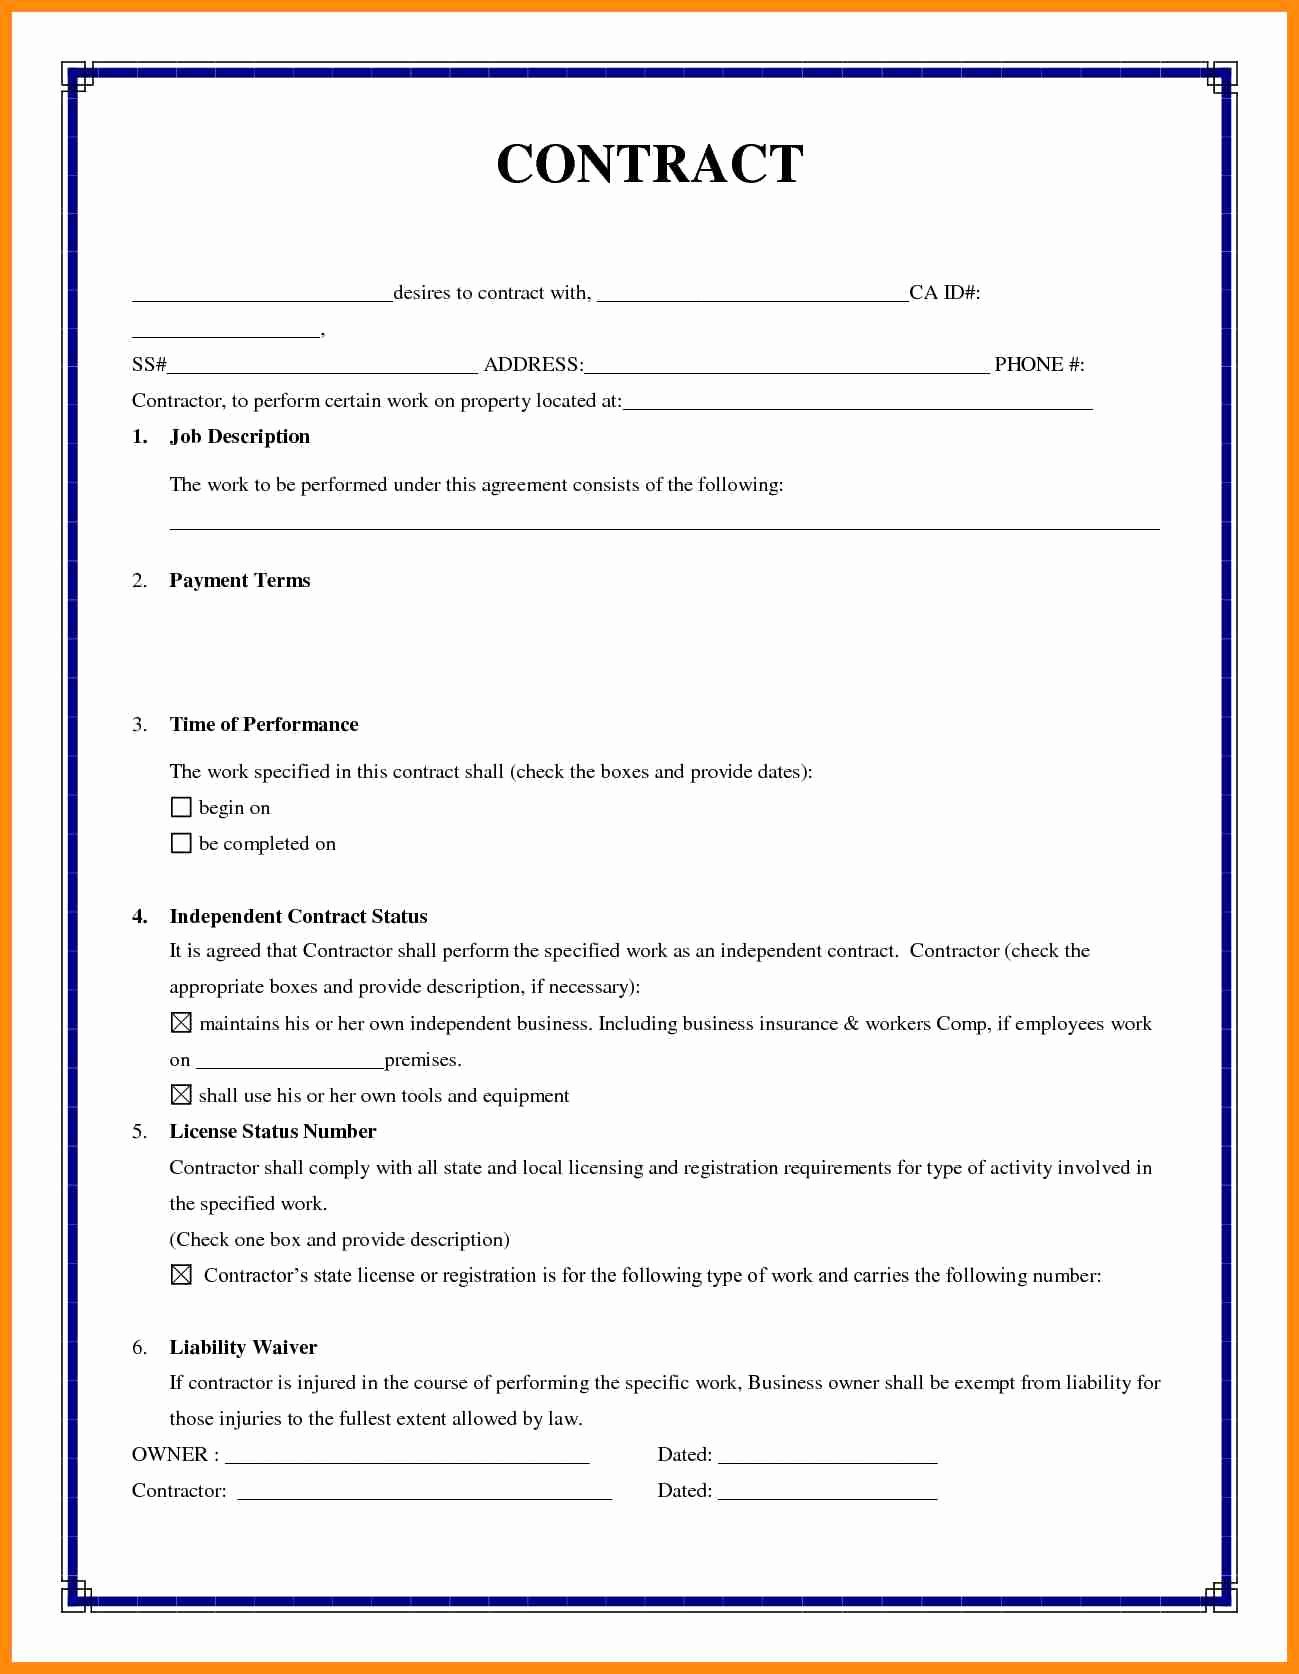 Contract for Construction Work Template Lovely Contract for Construction Work Template